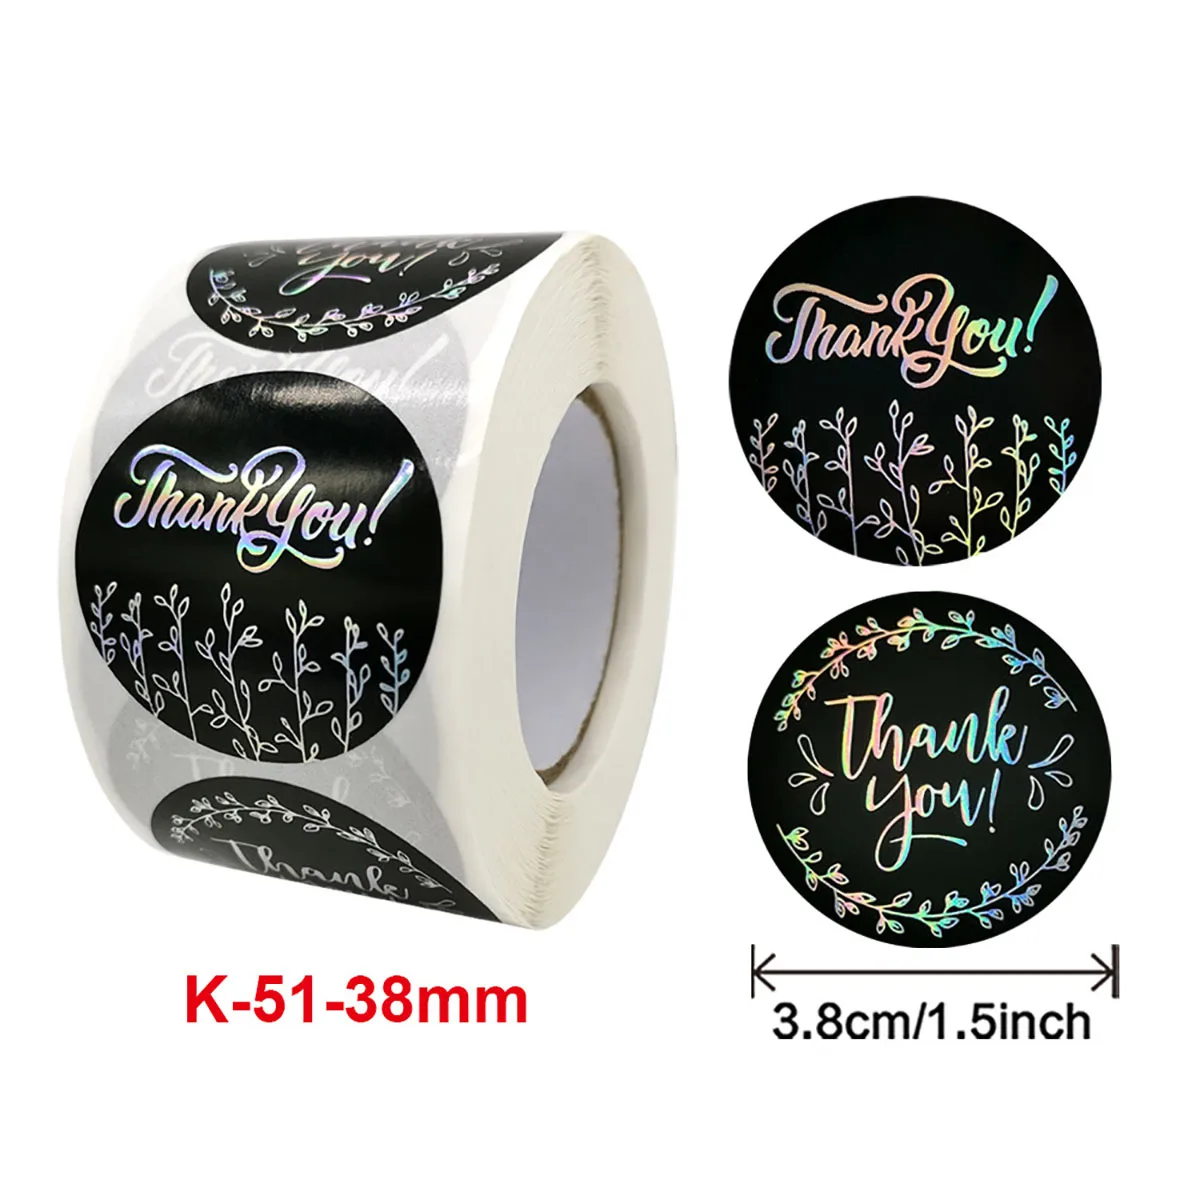 

500Pcs 1.5Inch Thankful Laser Text Black Stickers For Customer Label Card Gift Present Package Scrapbook Wrapping Supplies